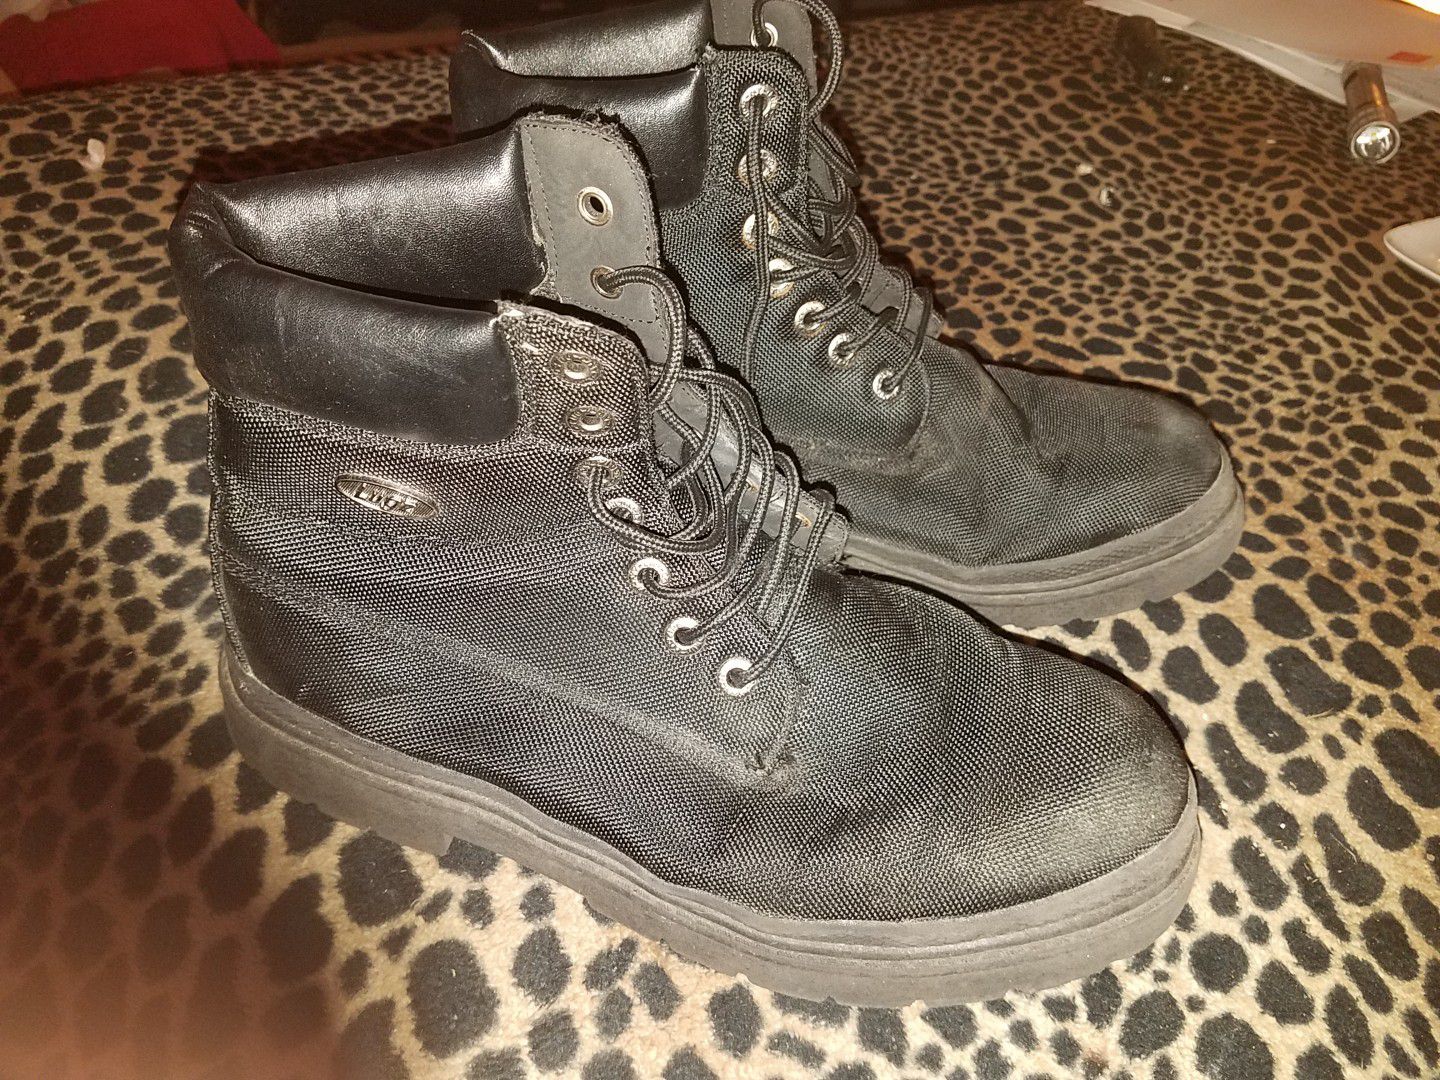 NEW Lugz Work Boots Size 12